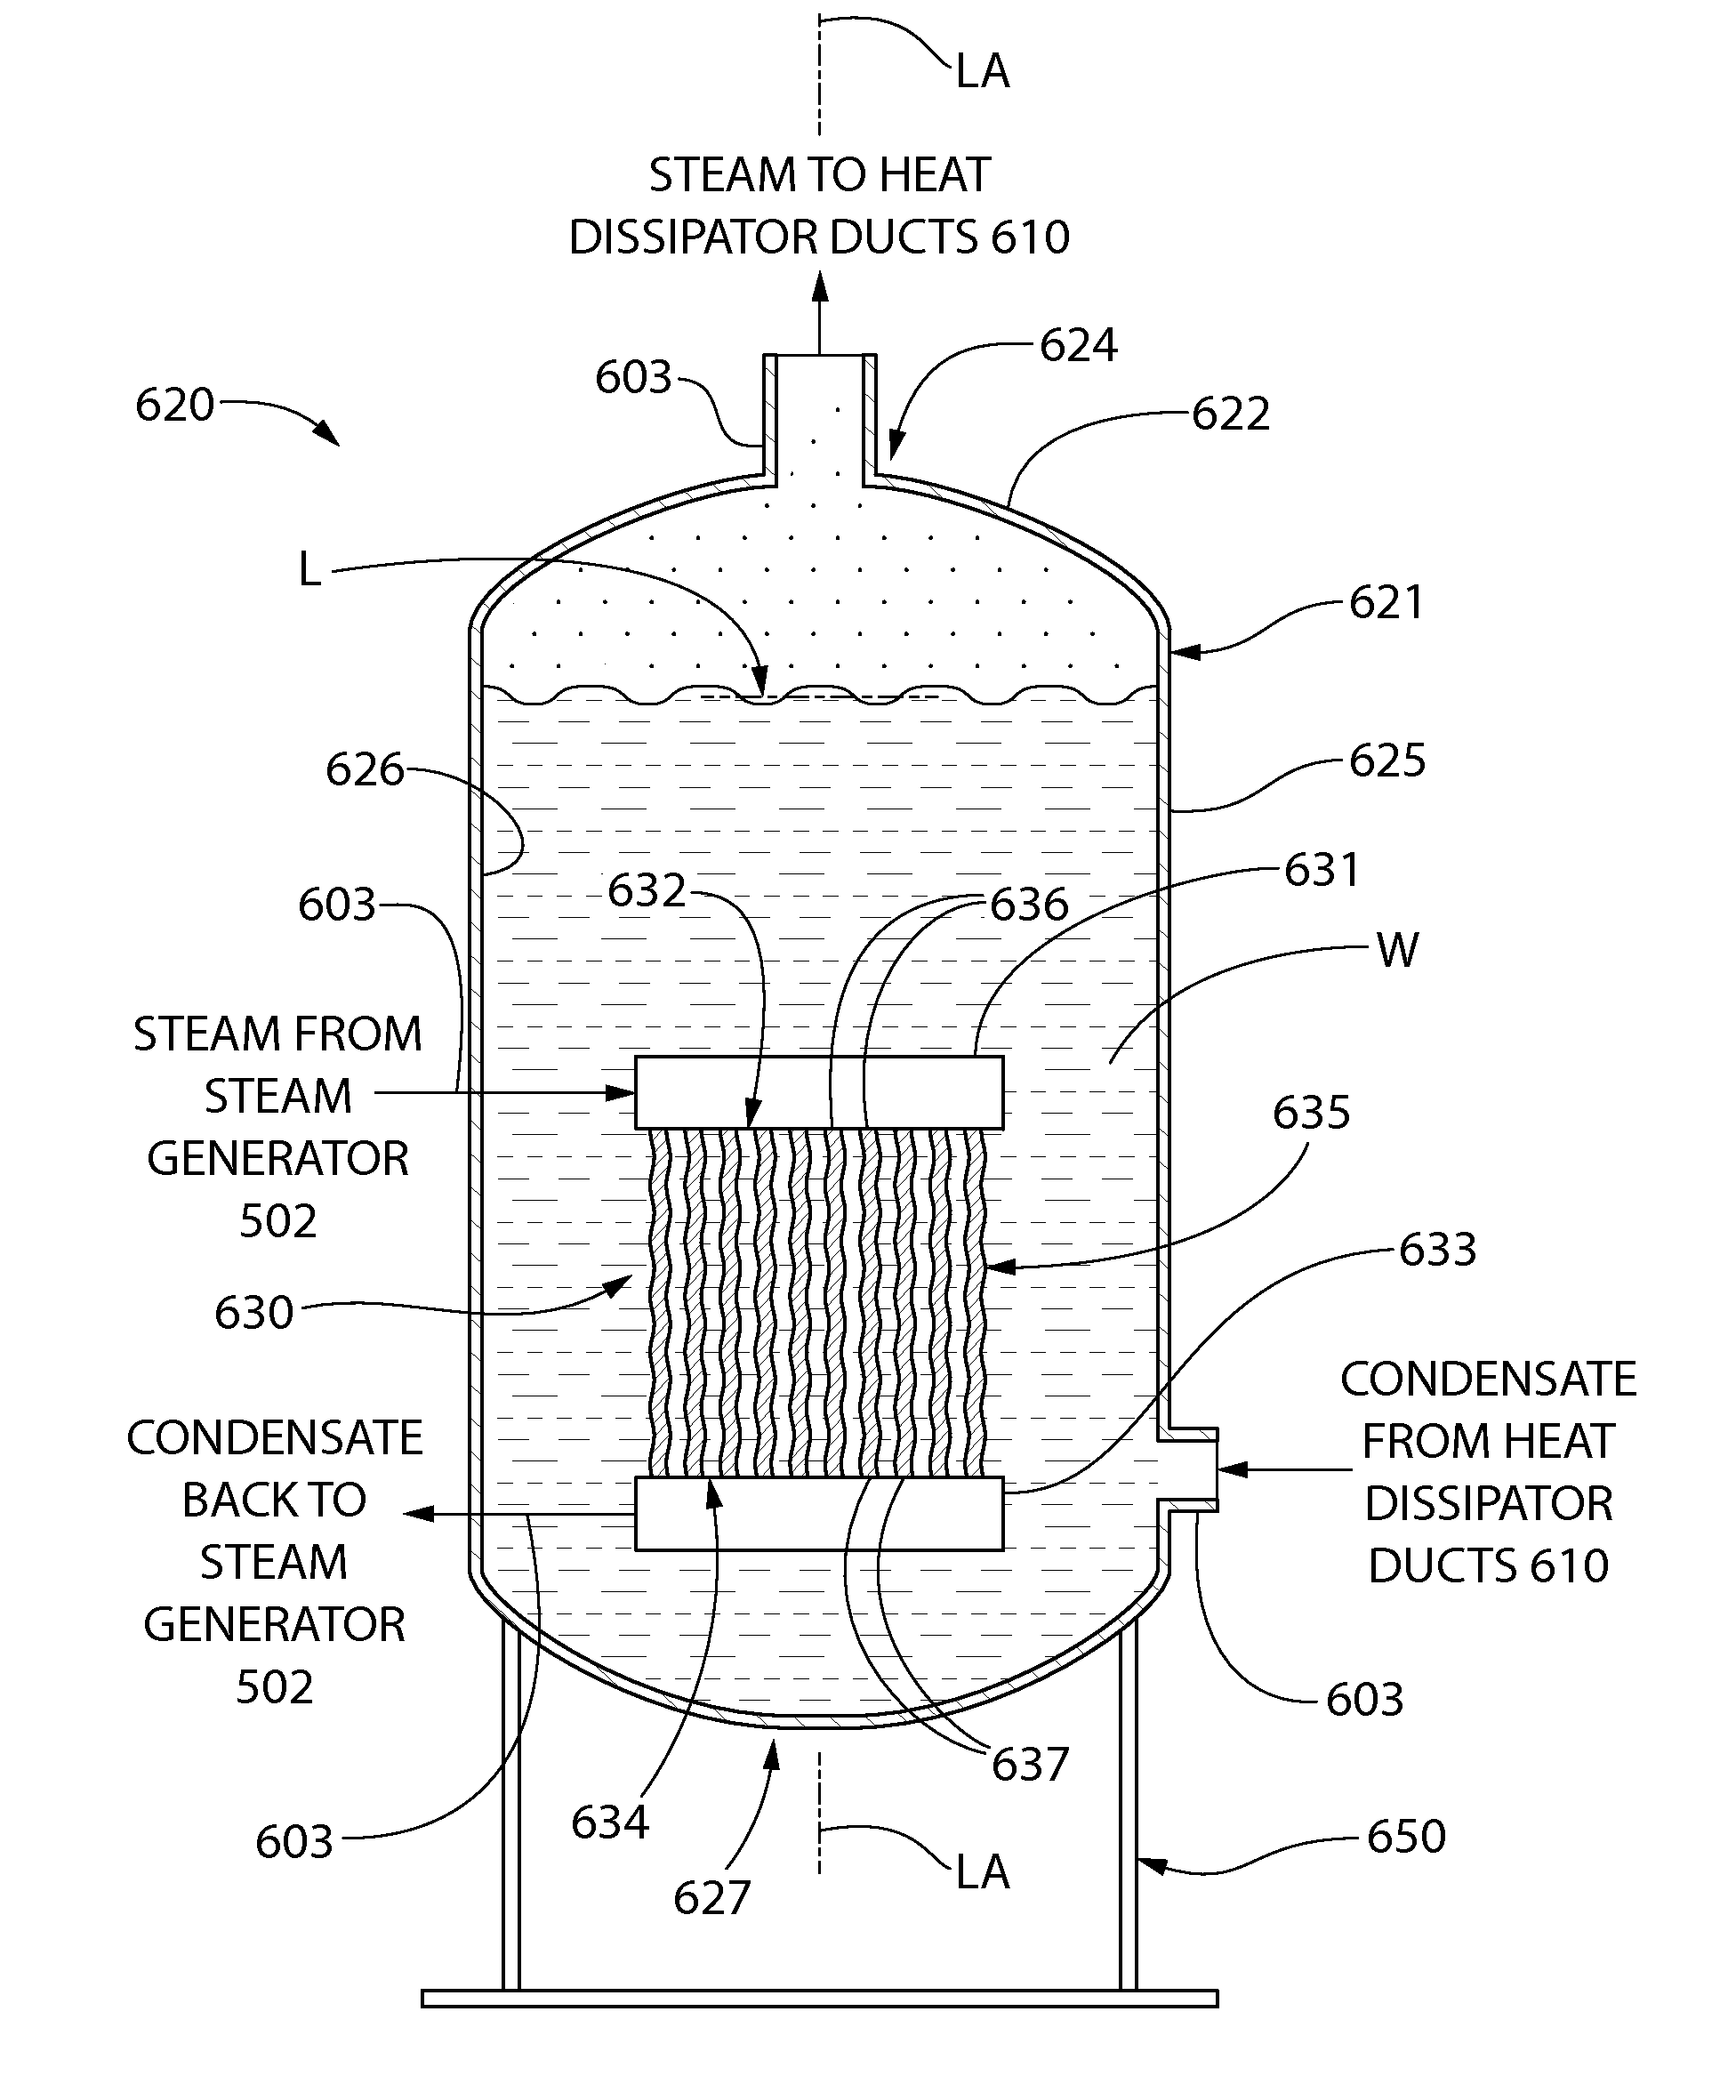 Passive reactor cooling system